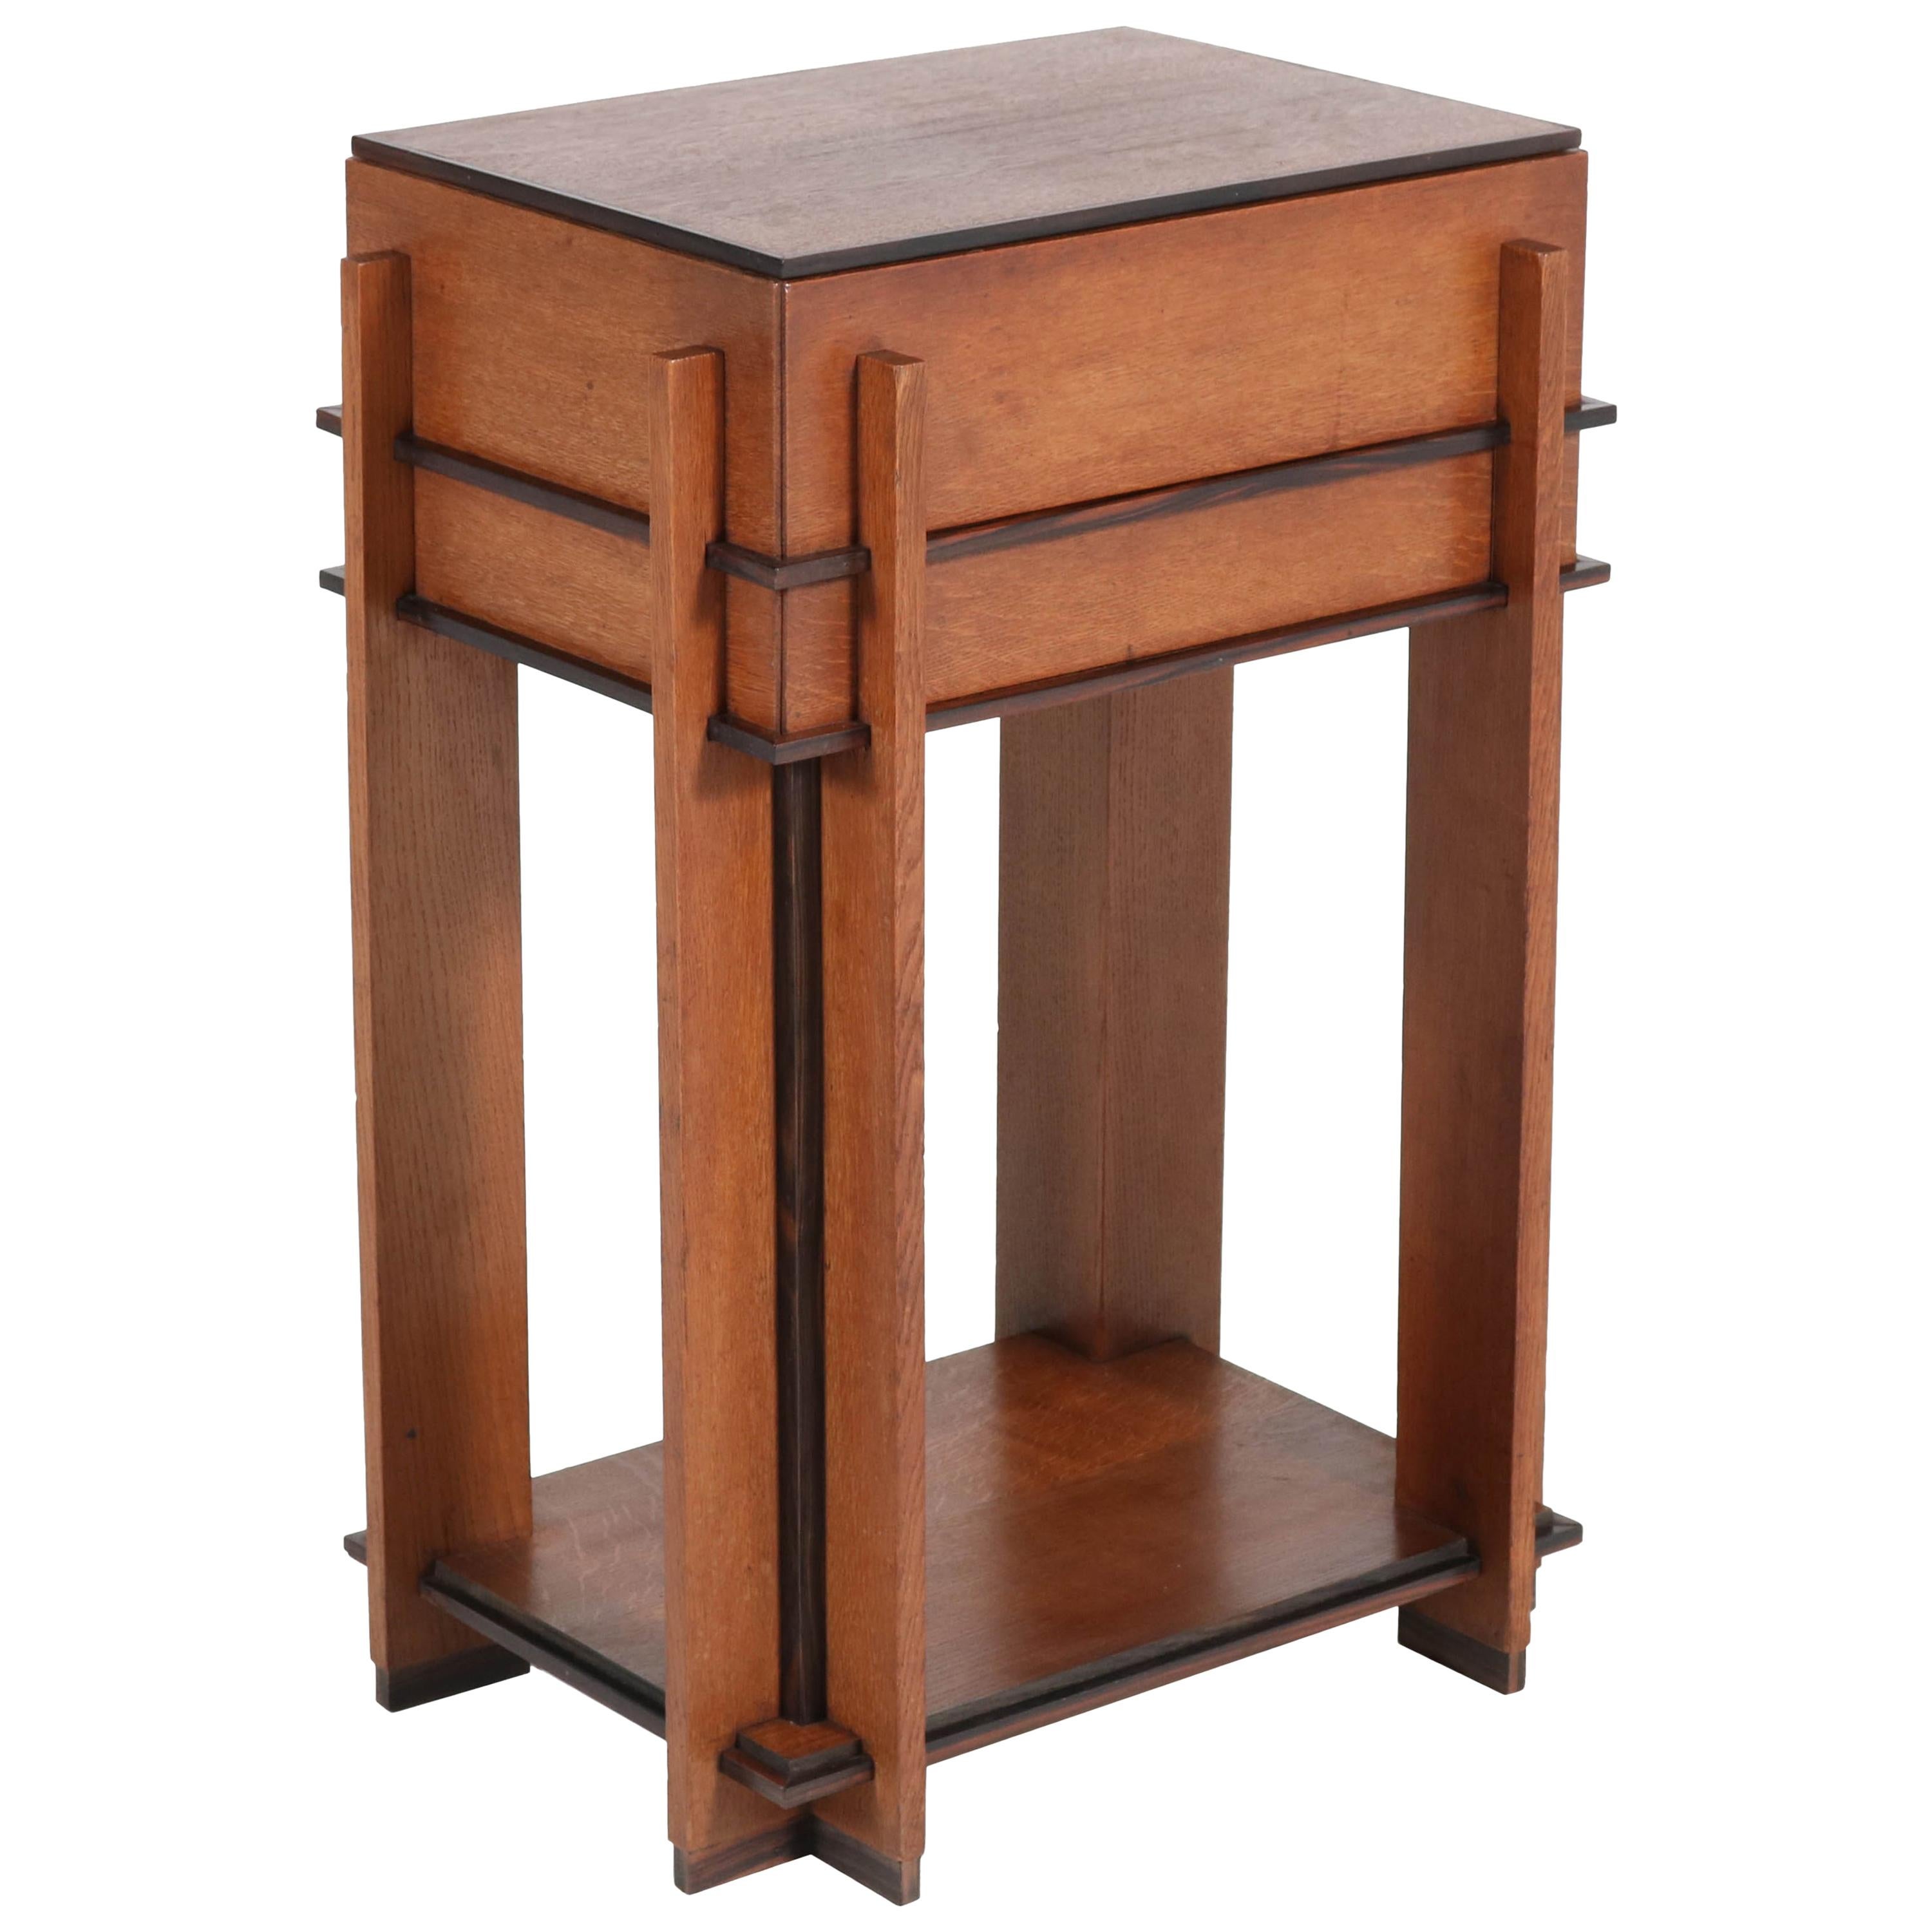 Oak Art Deco Haagse School Sewing Table by J. Roodenburgh, 1920s